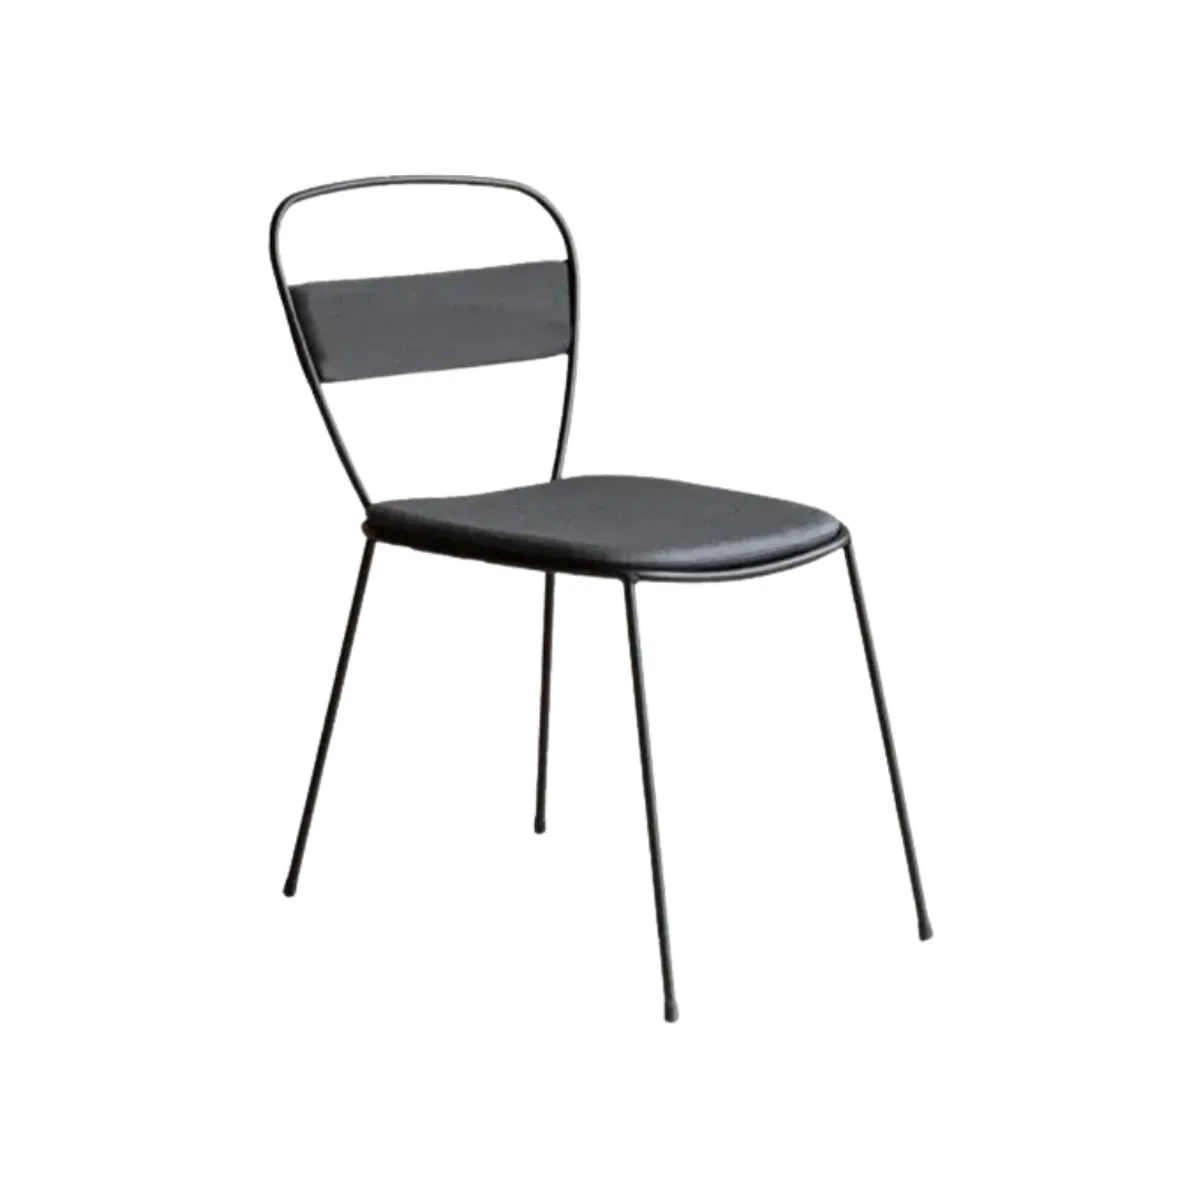 Sedna side chair